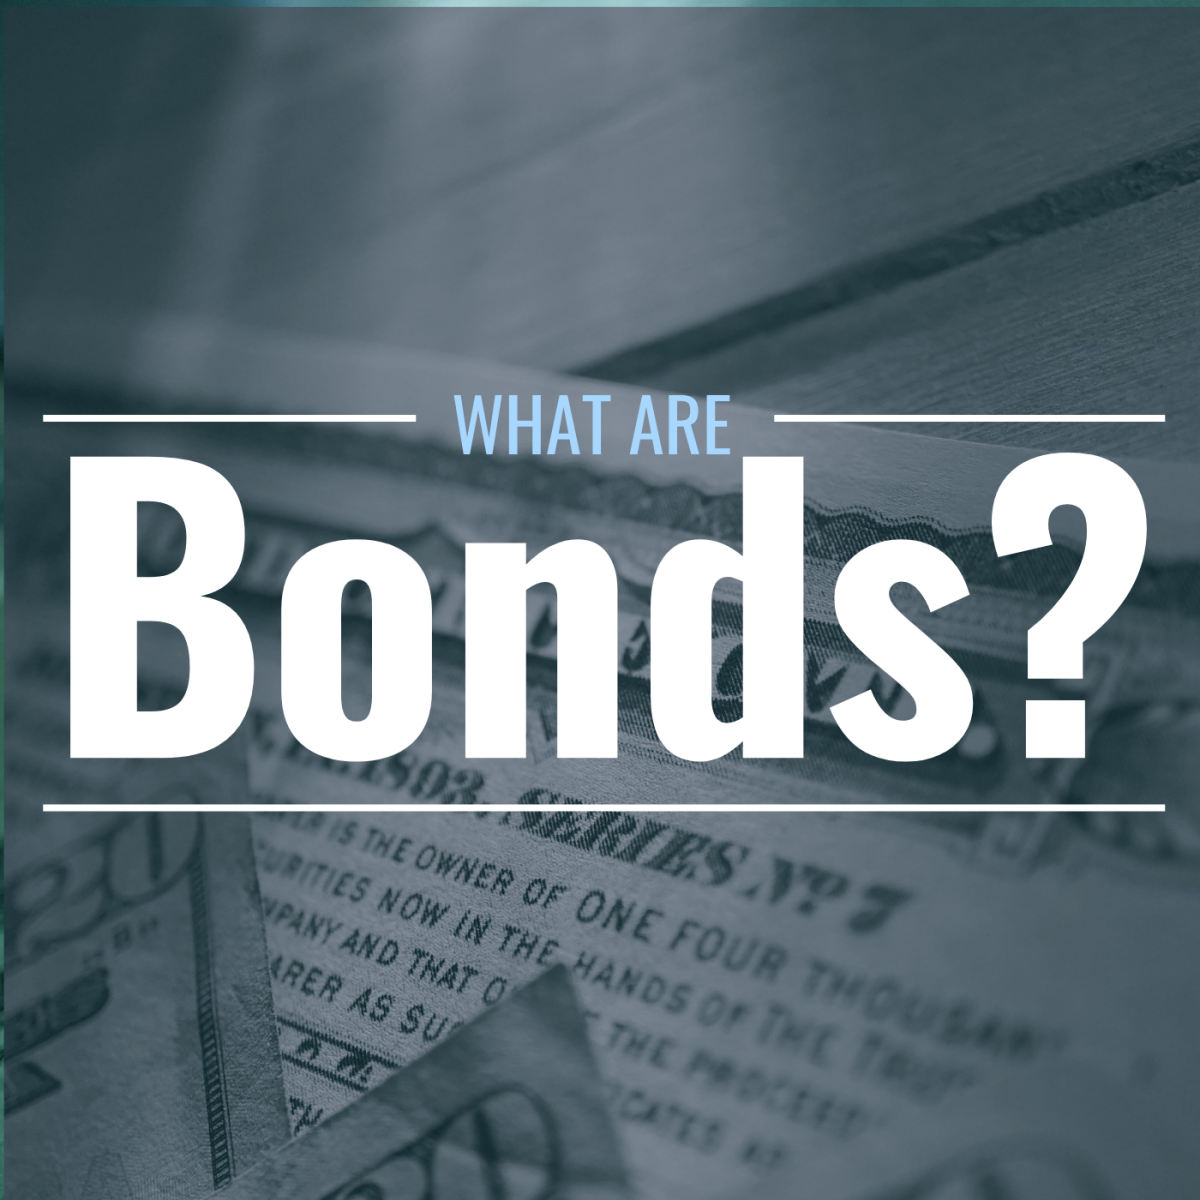 Image of Bond Certificate with text overlay "What Are Bonds?"